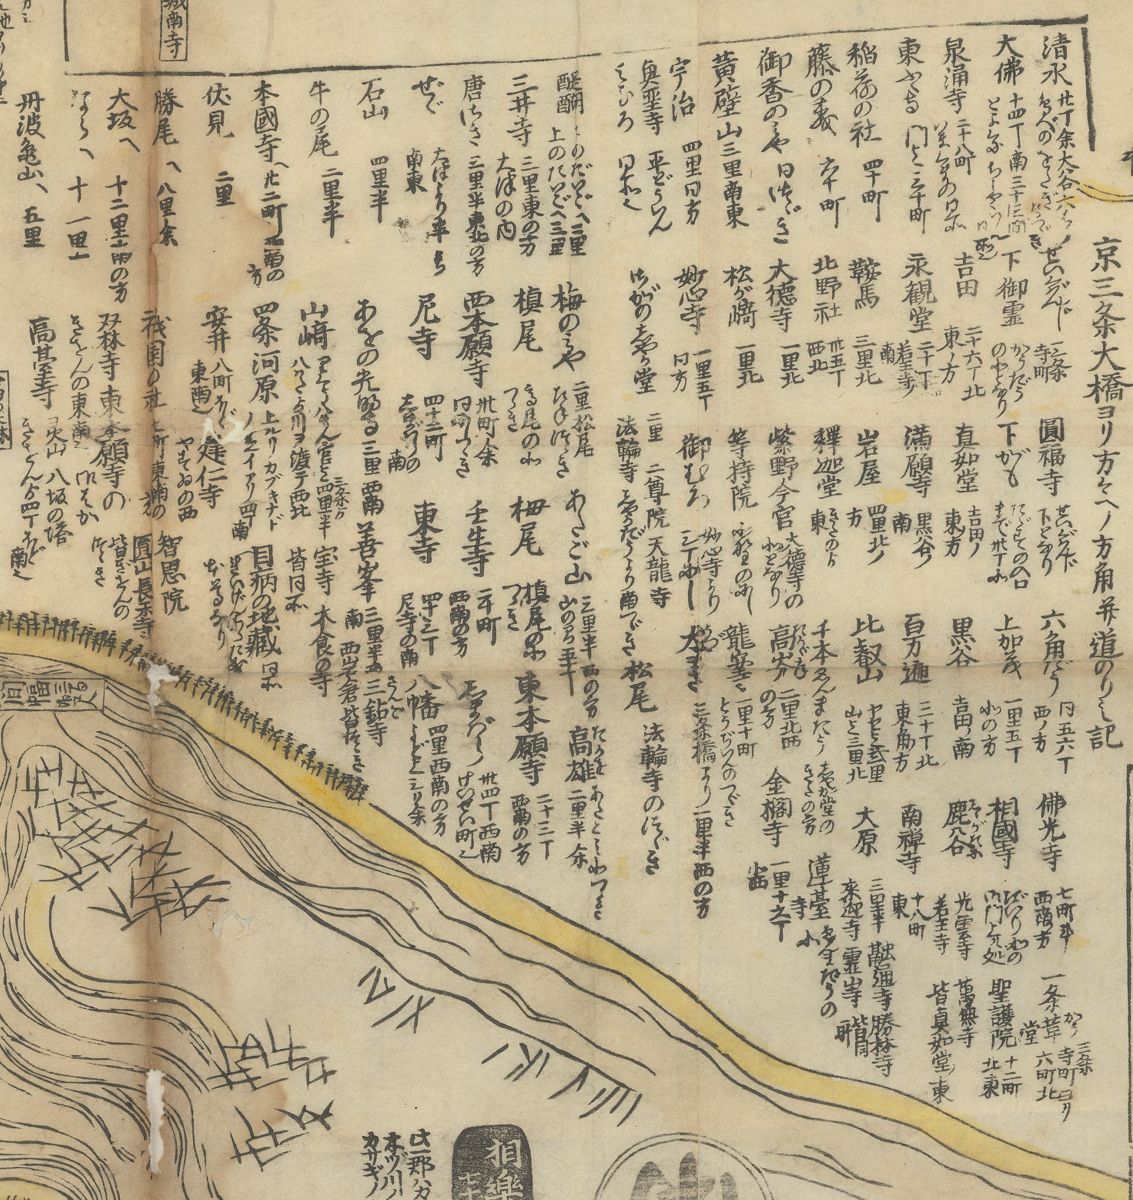 Text showing locations from Large map of Kyoto (1734–36)